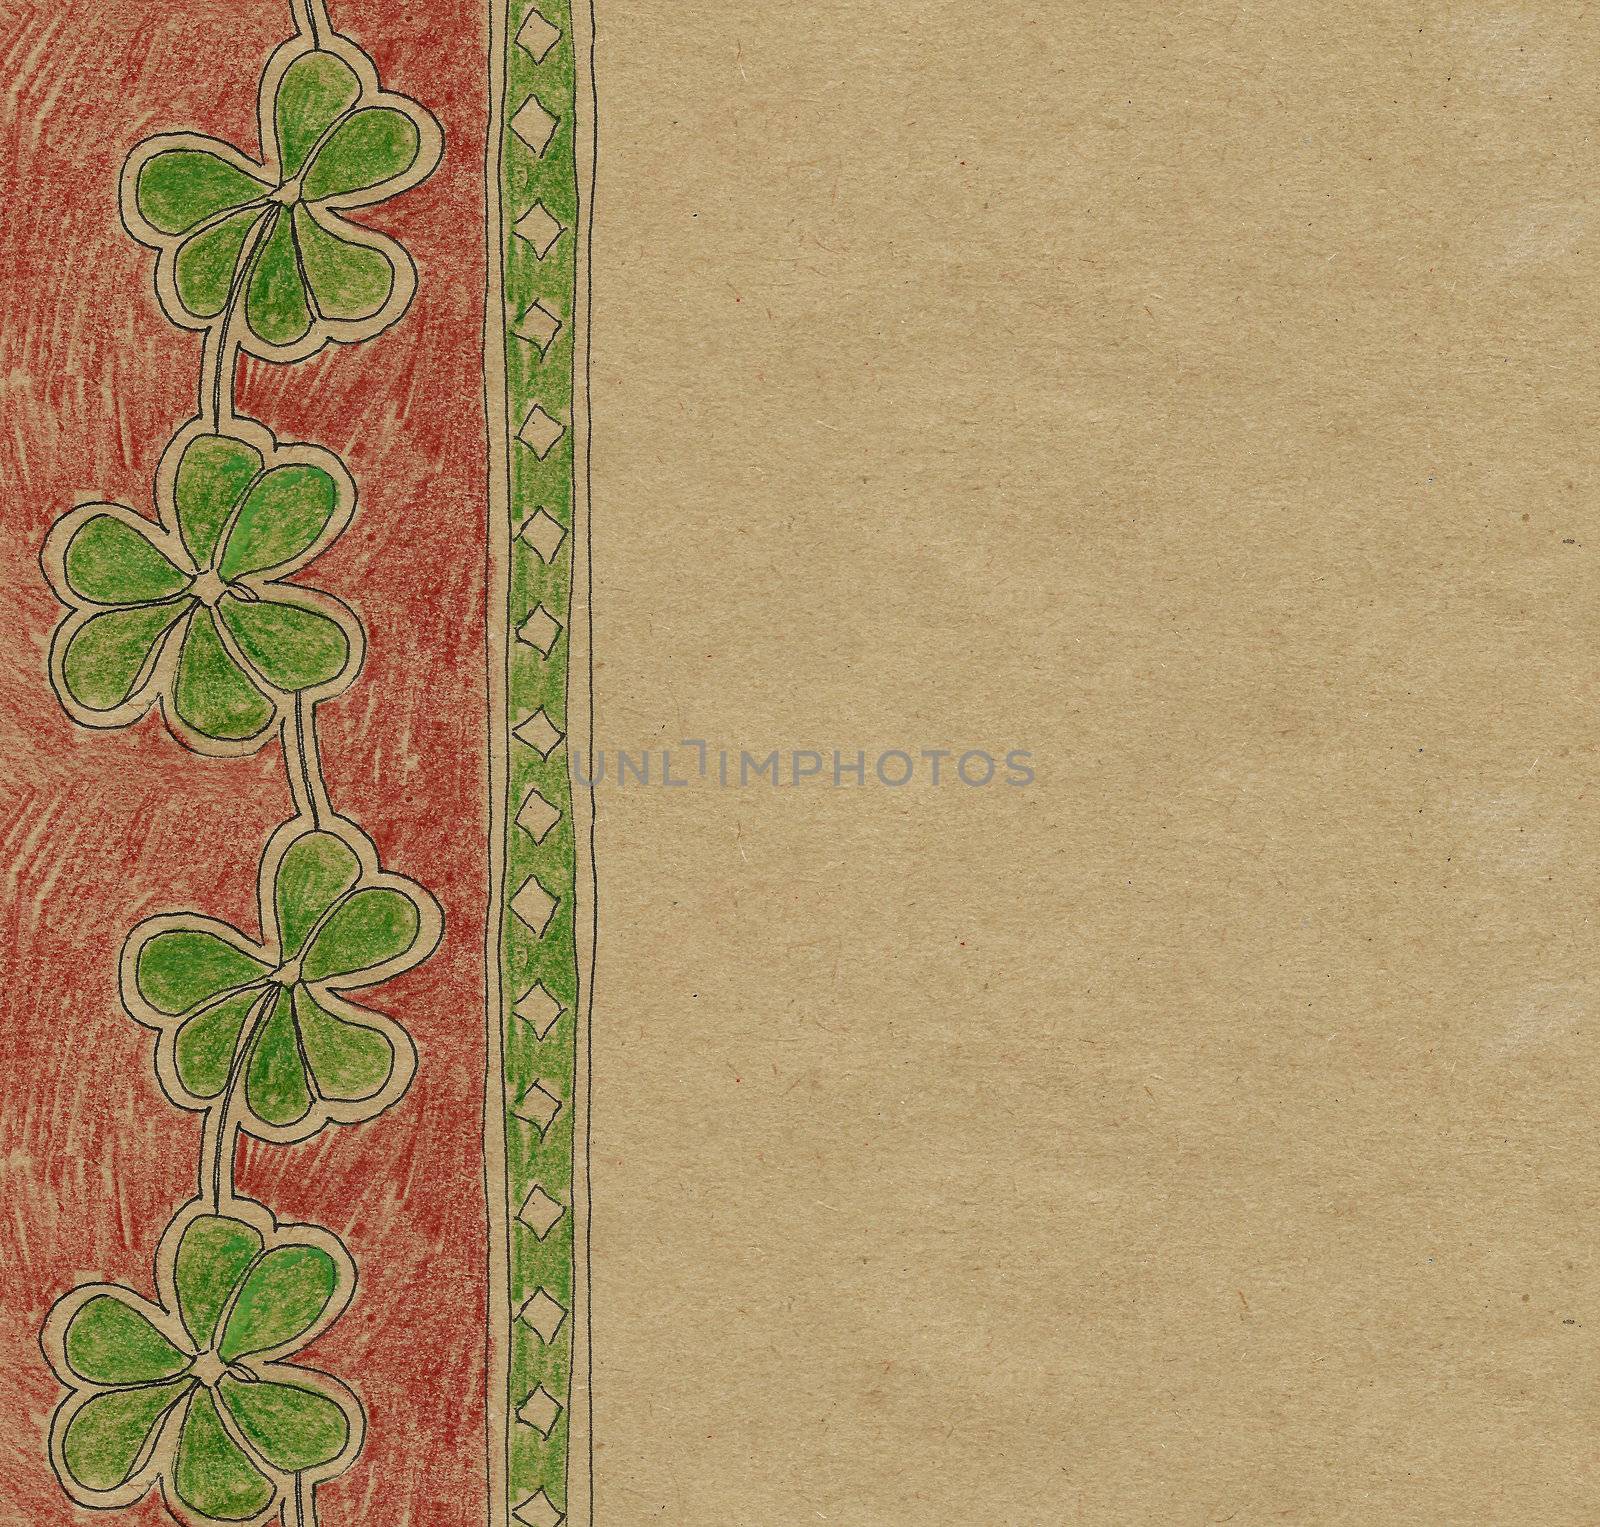 boart seamless pattern with a pencil hatching on craft. Ornate a three leaves clover